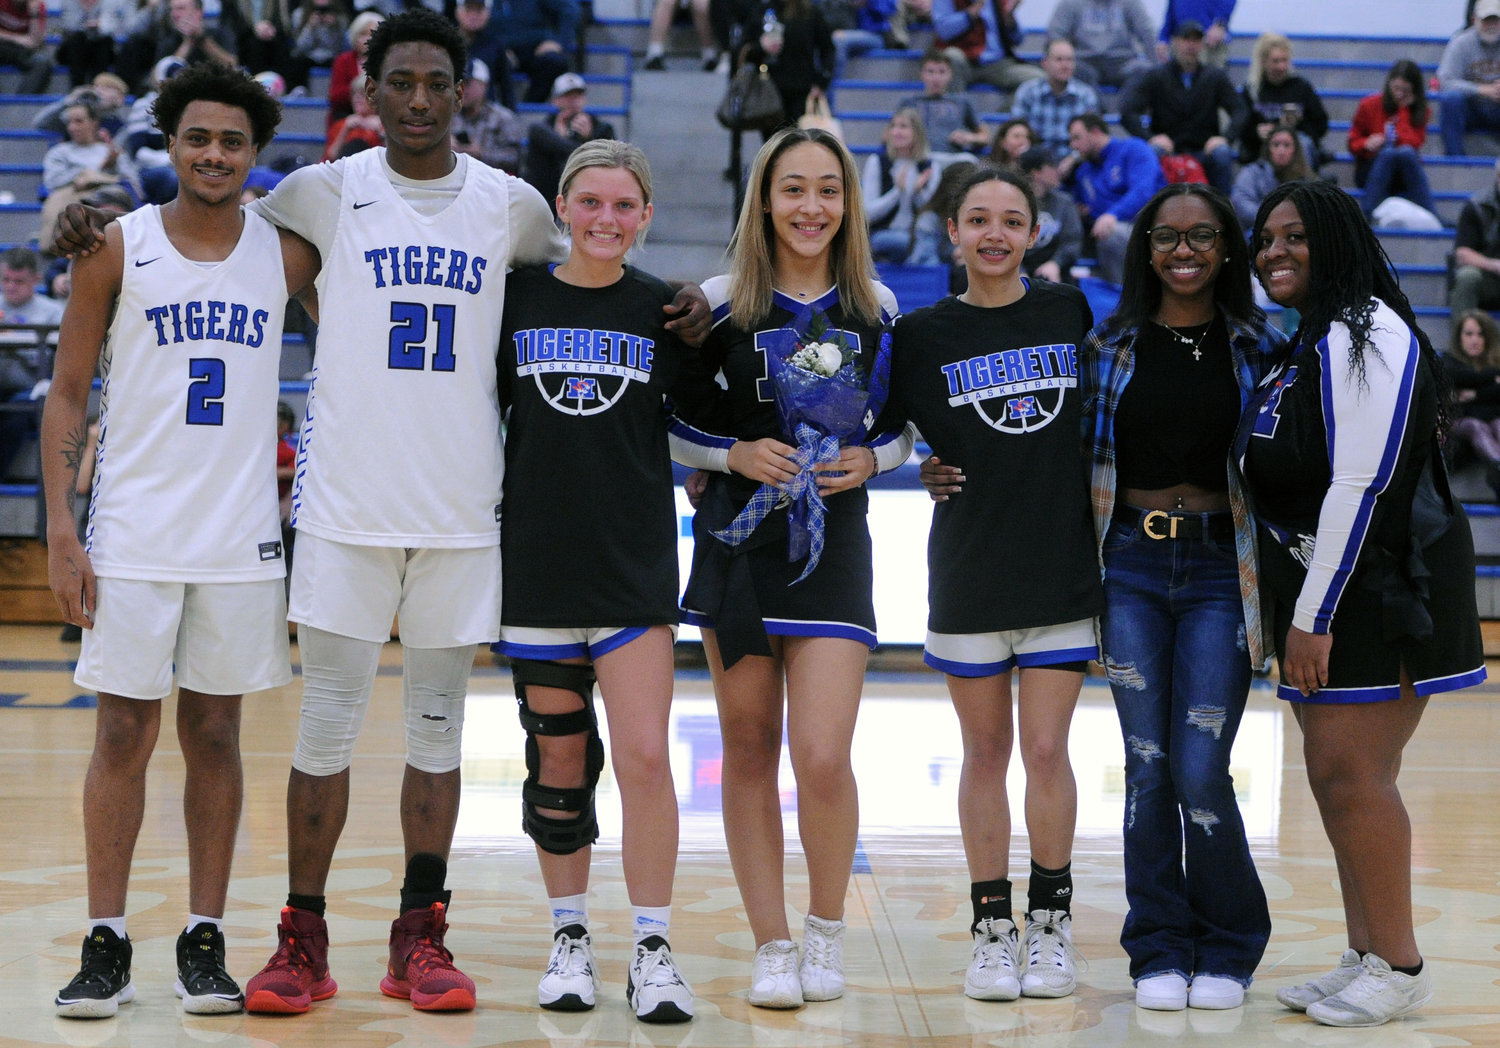 In between the Tigerettes’ and Tigers’ games on Thursday against Page, the school honored the senior basketball players and cheerleaders, who will graduate this year.